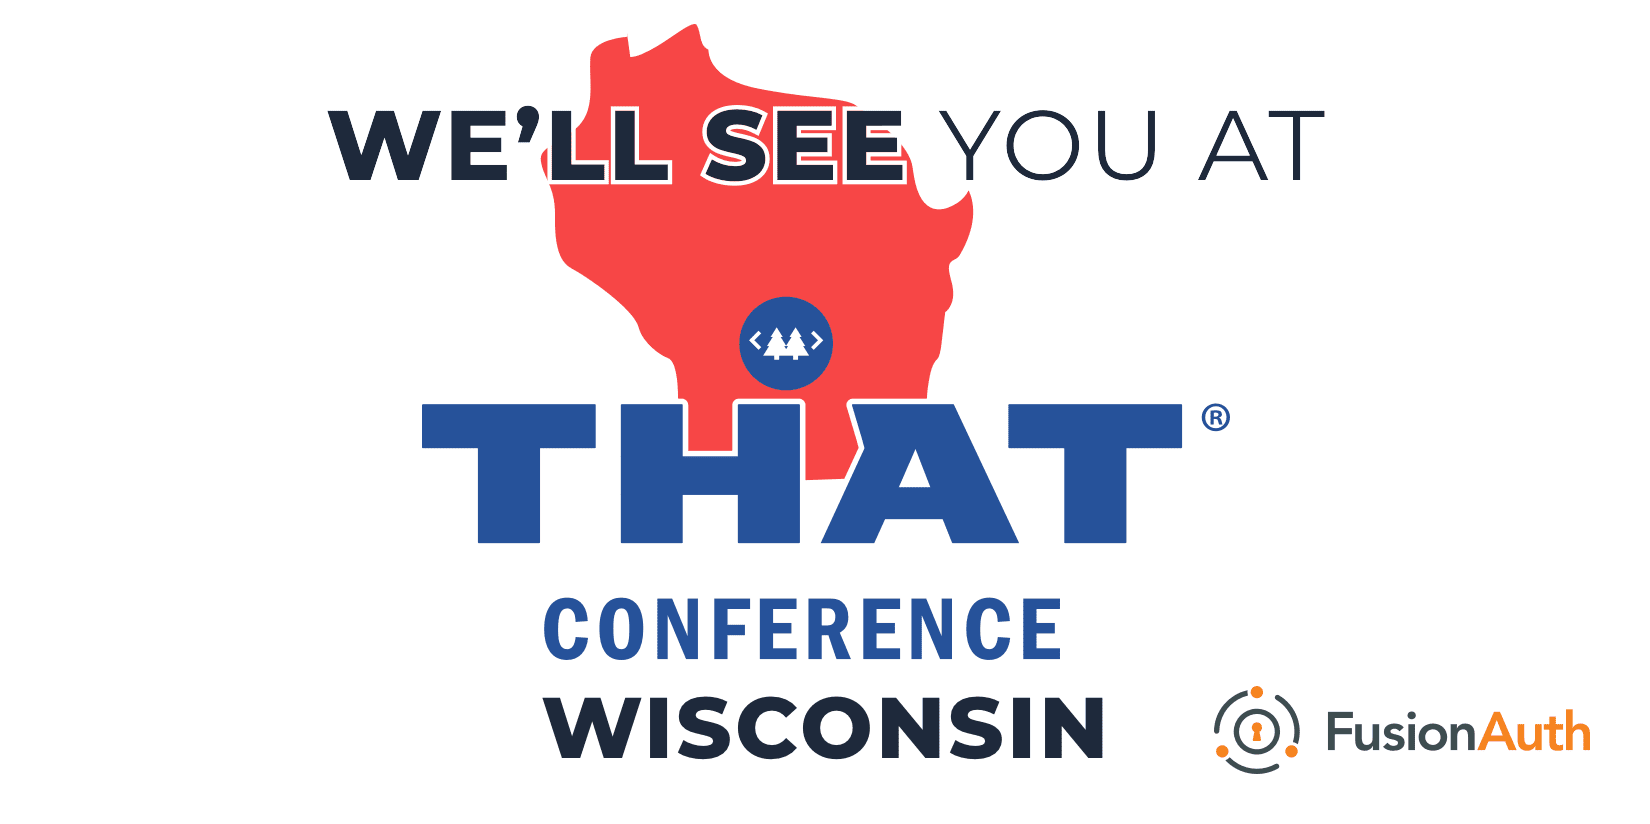 We'll see you at THAT Conference